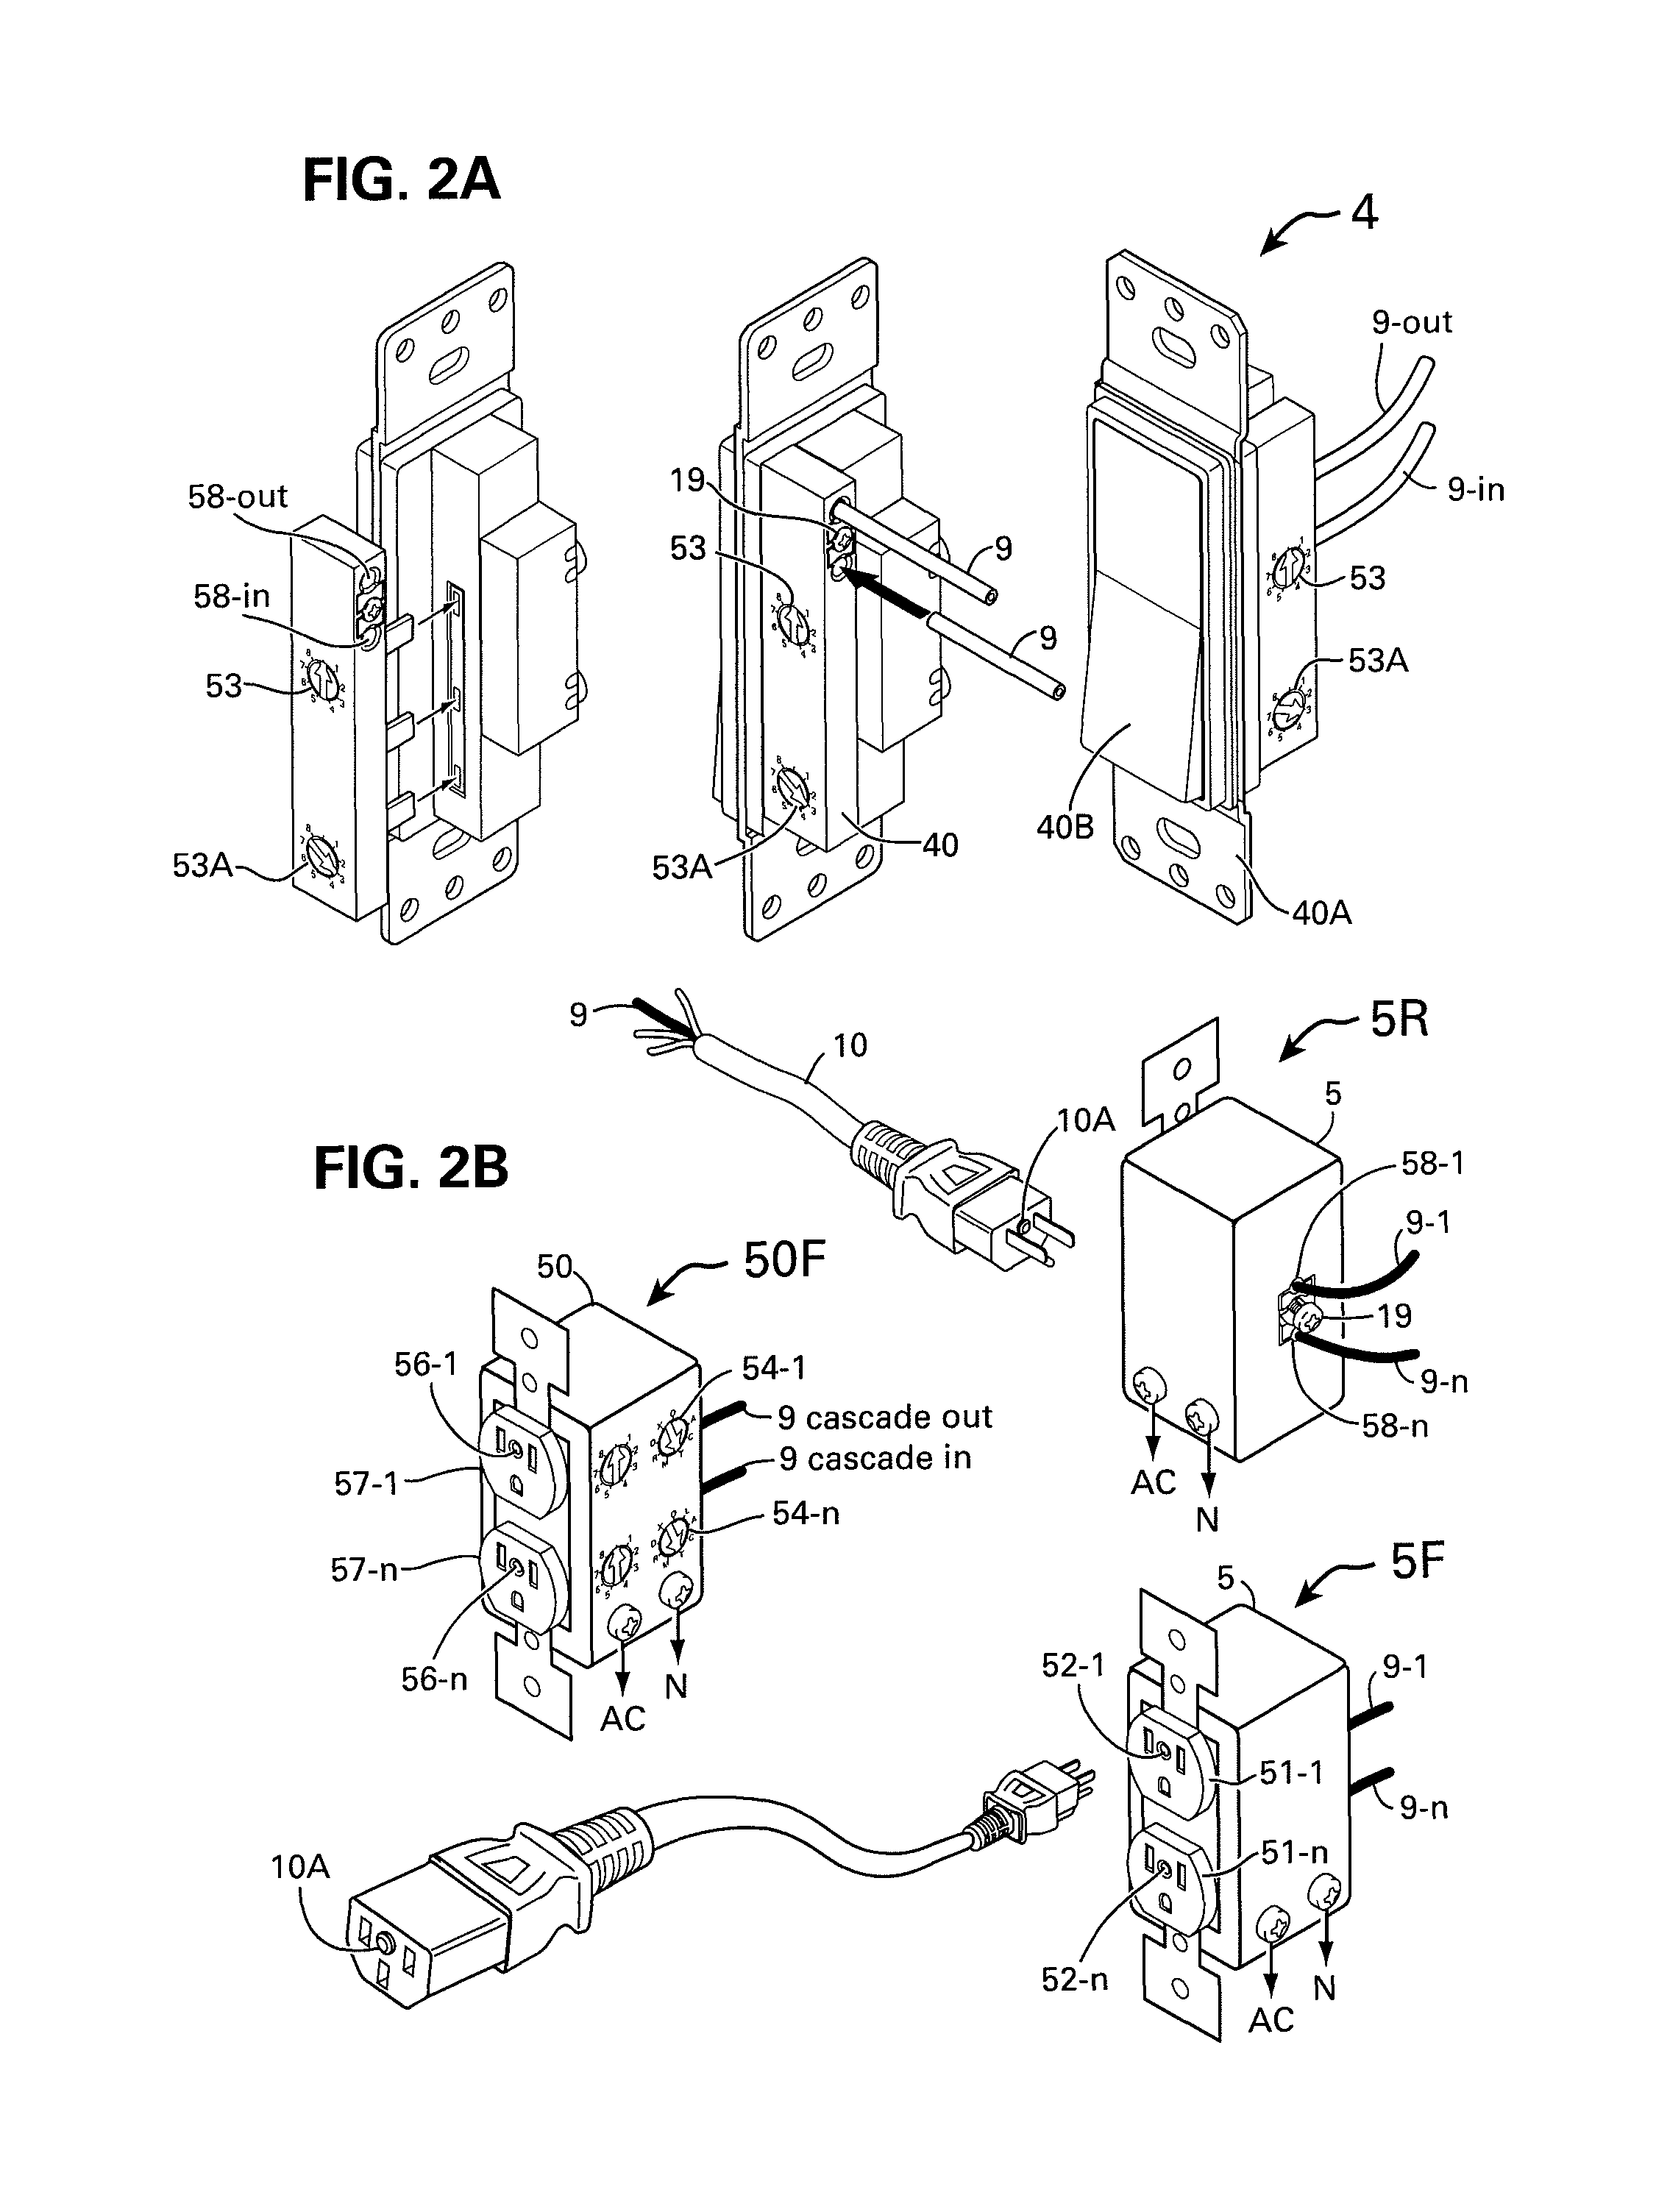 Method and apparatus for coding and linking electrical appliances for control and status report